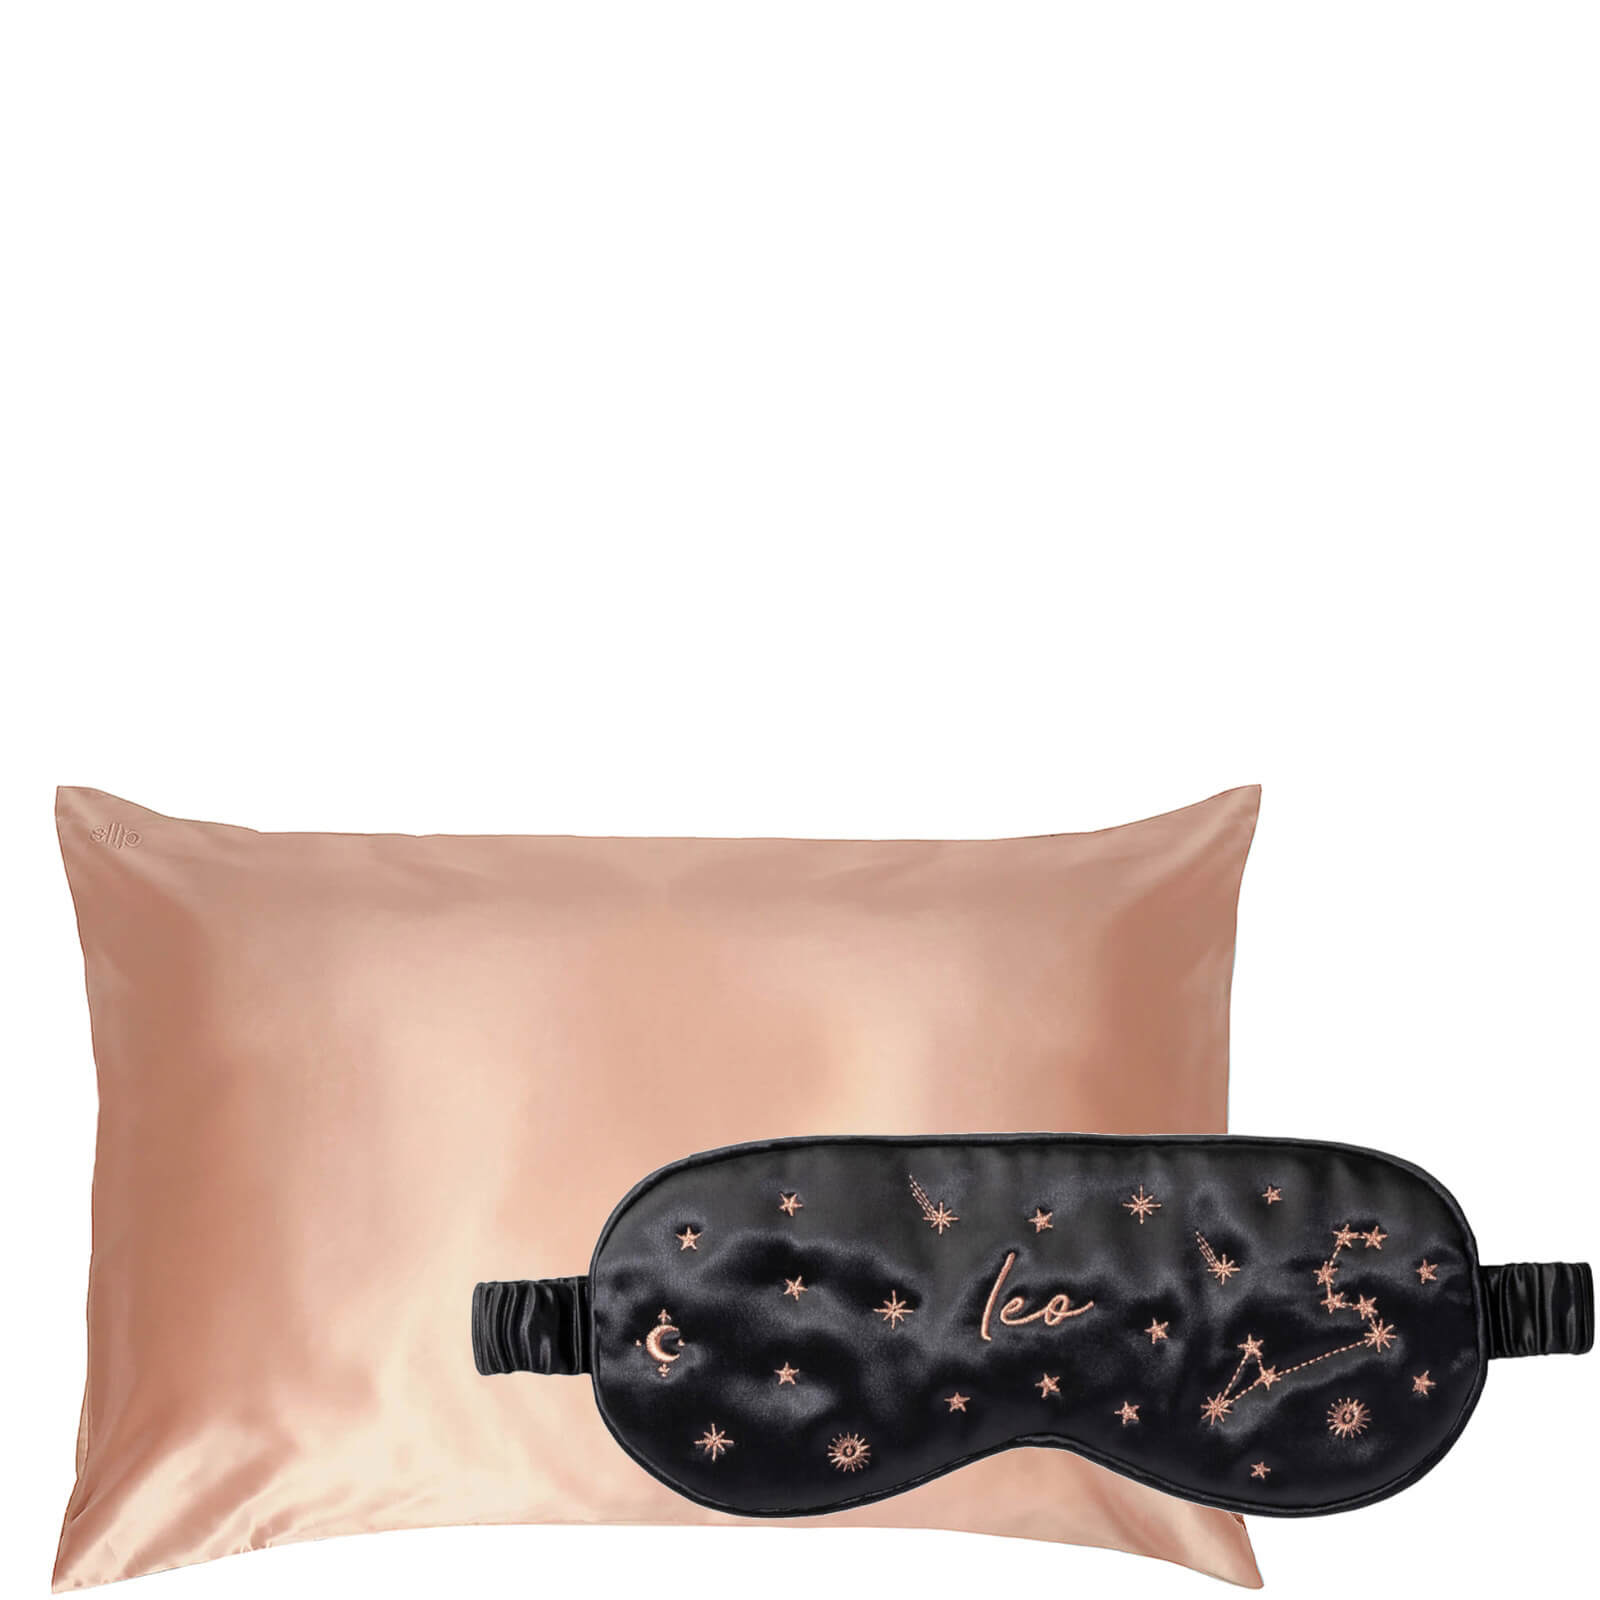 Slip Exclusive Zodiac Sleep Mask and Rose Gold Pillowcase (Various Options) - Leo